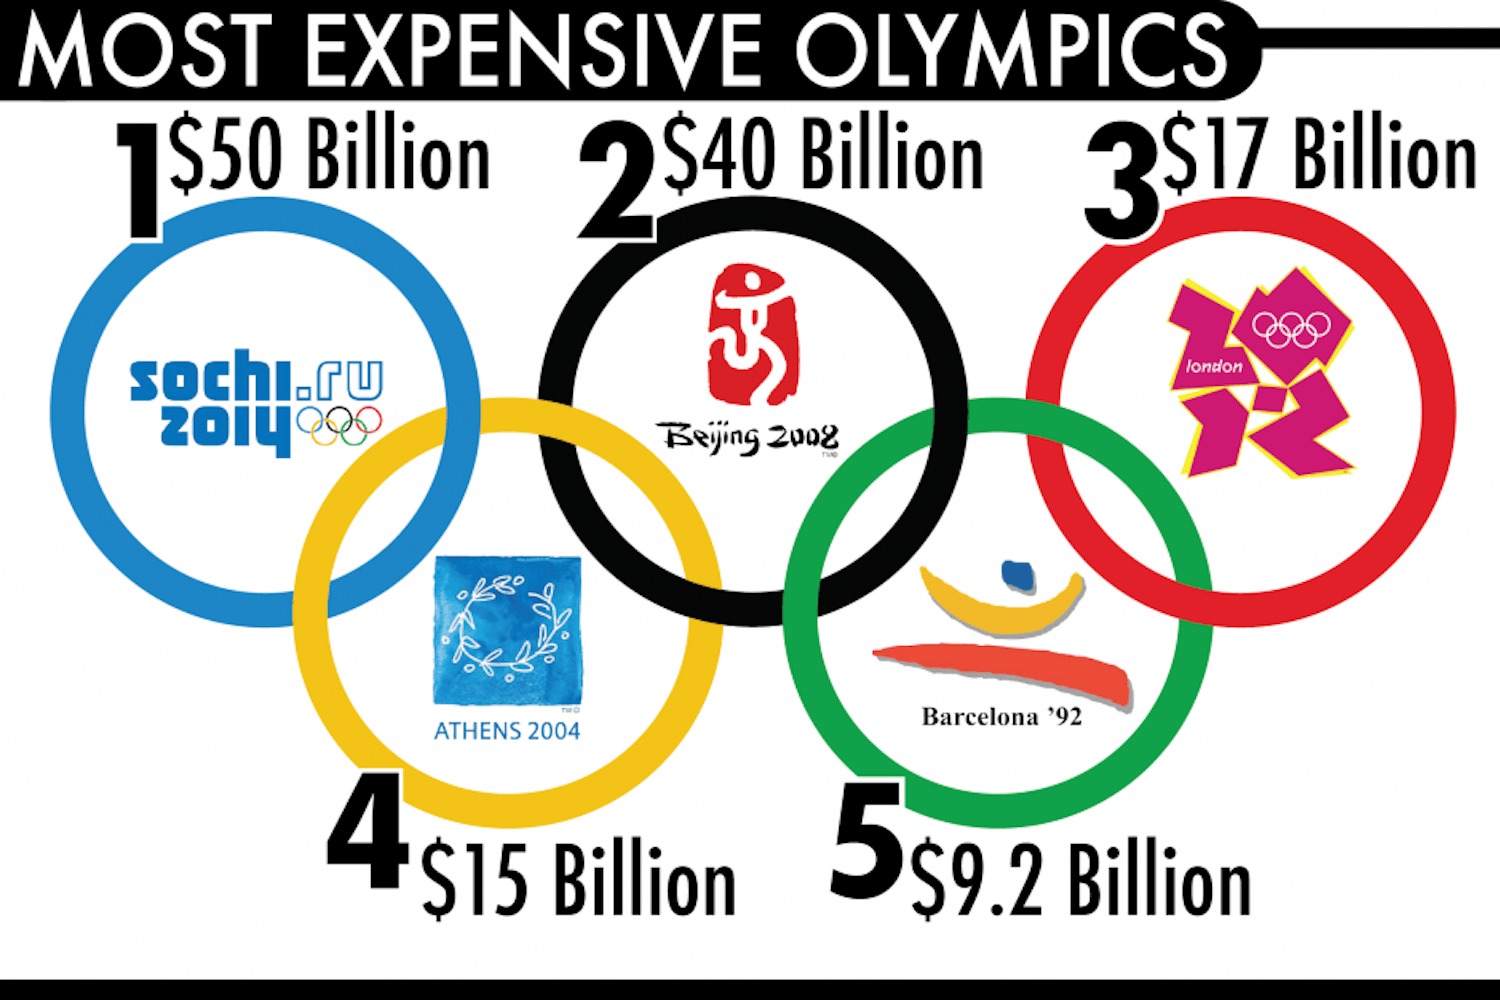 Expensive Olympics infographic